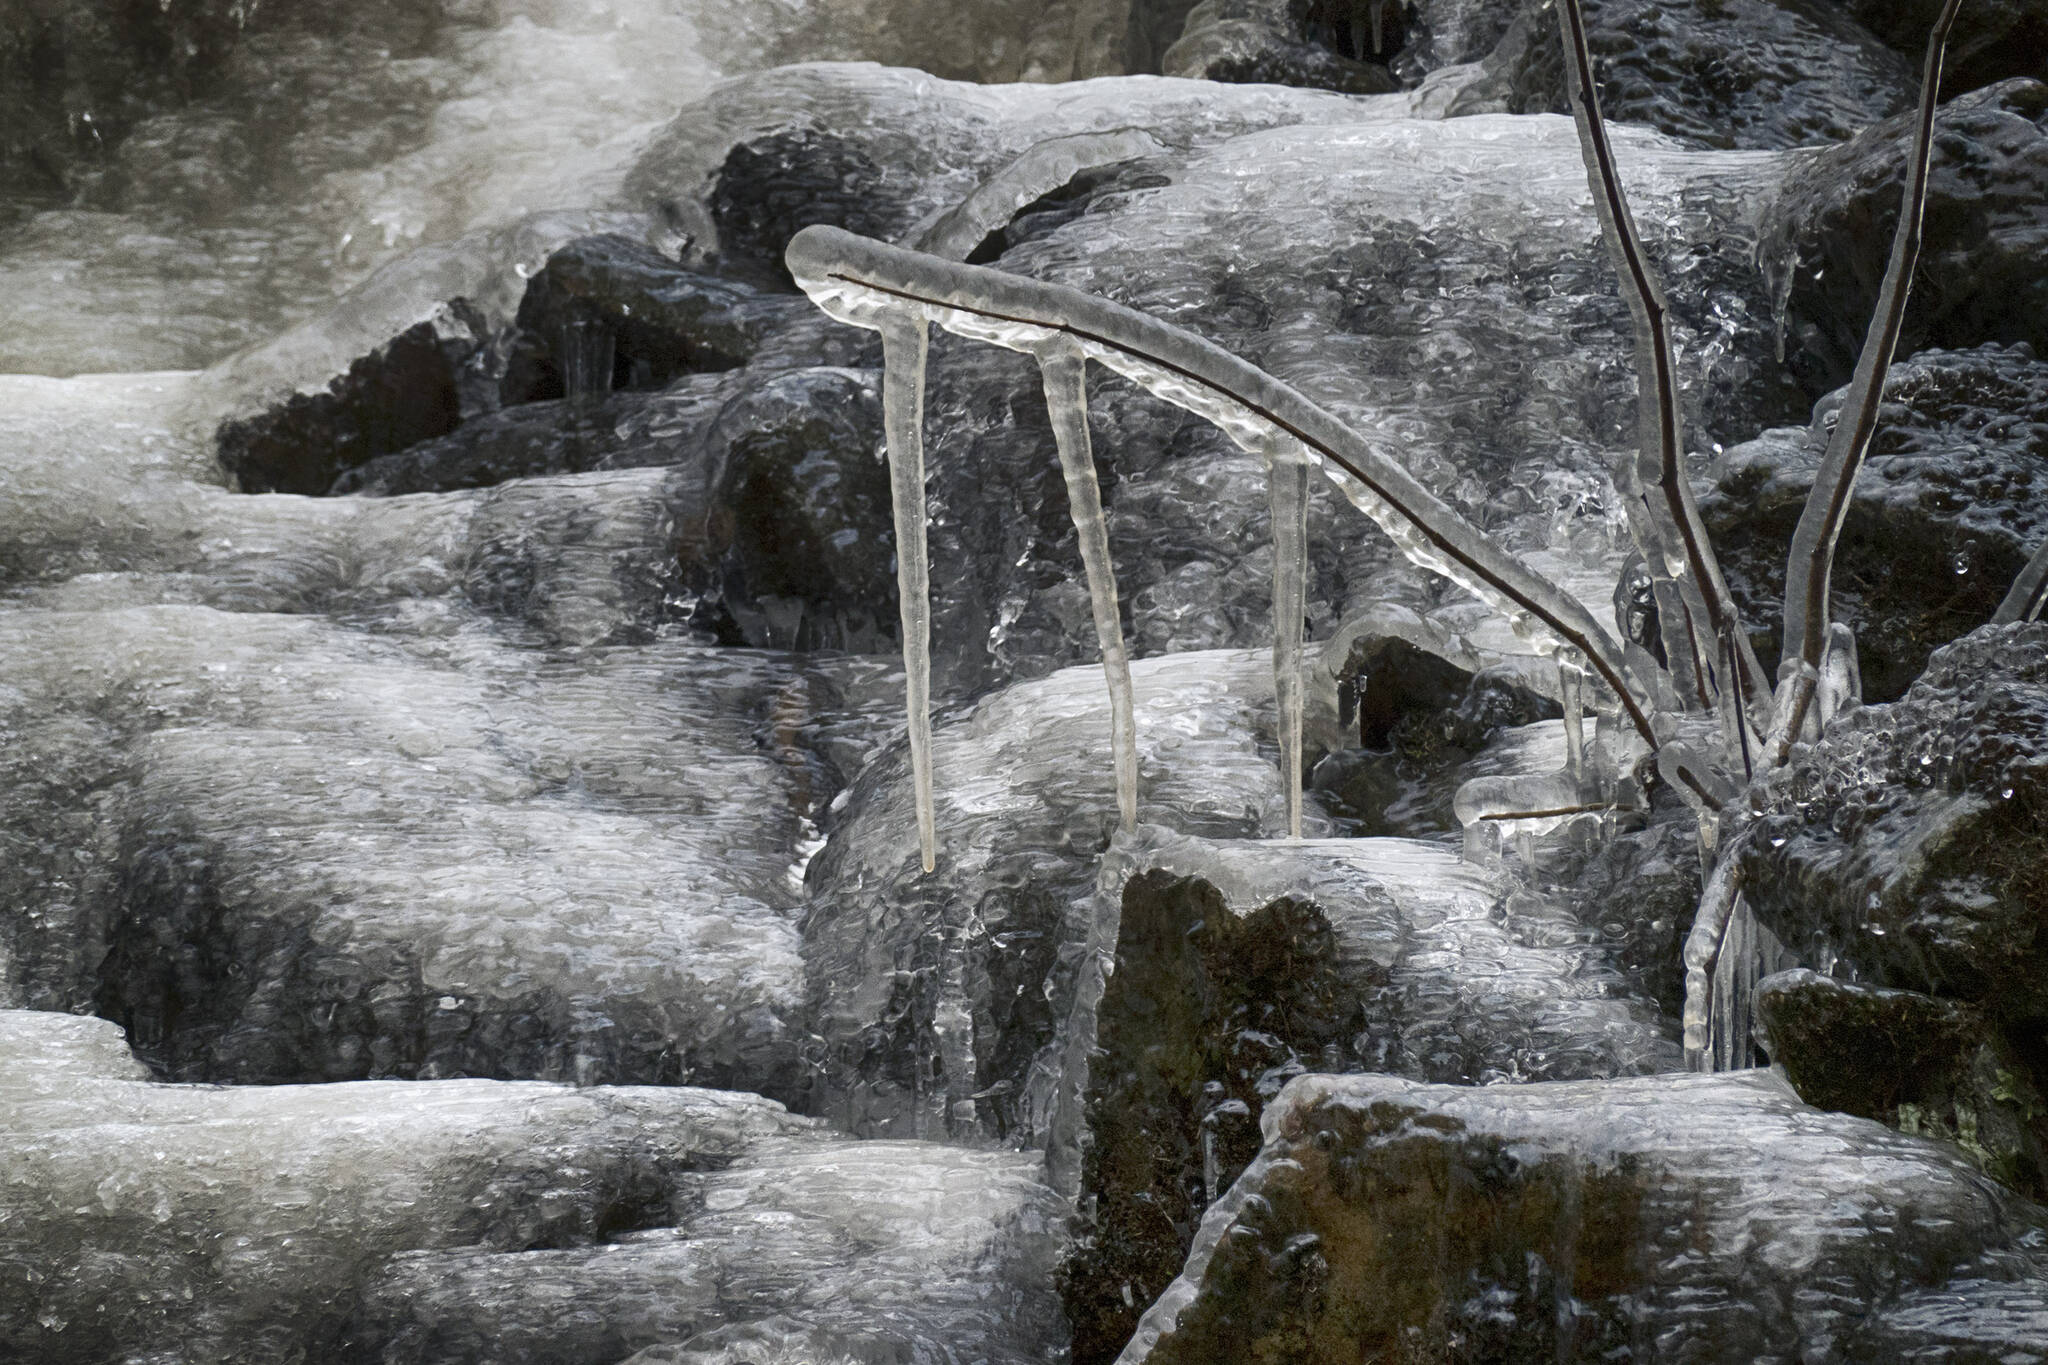 Branching out icicles from major ice flow, Auke Recreation Area. (Courtesy Photo / Kenneth Gill, gillfoto)